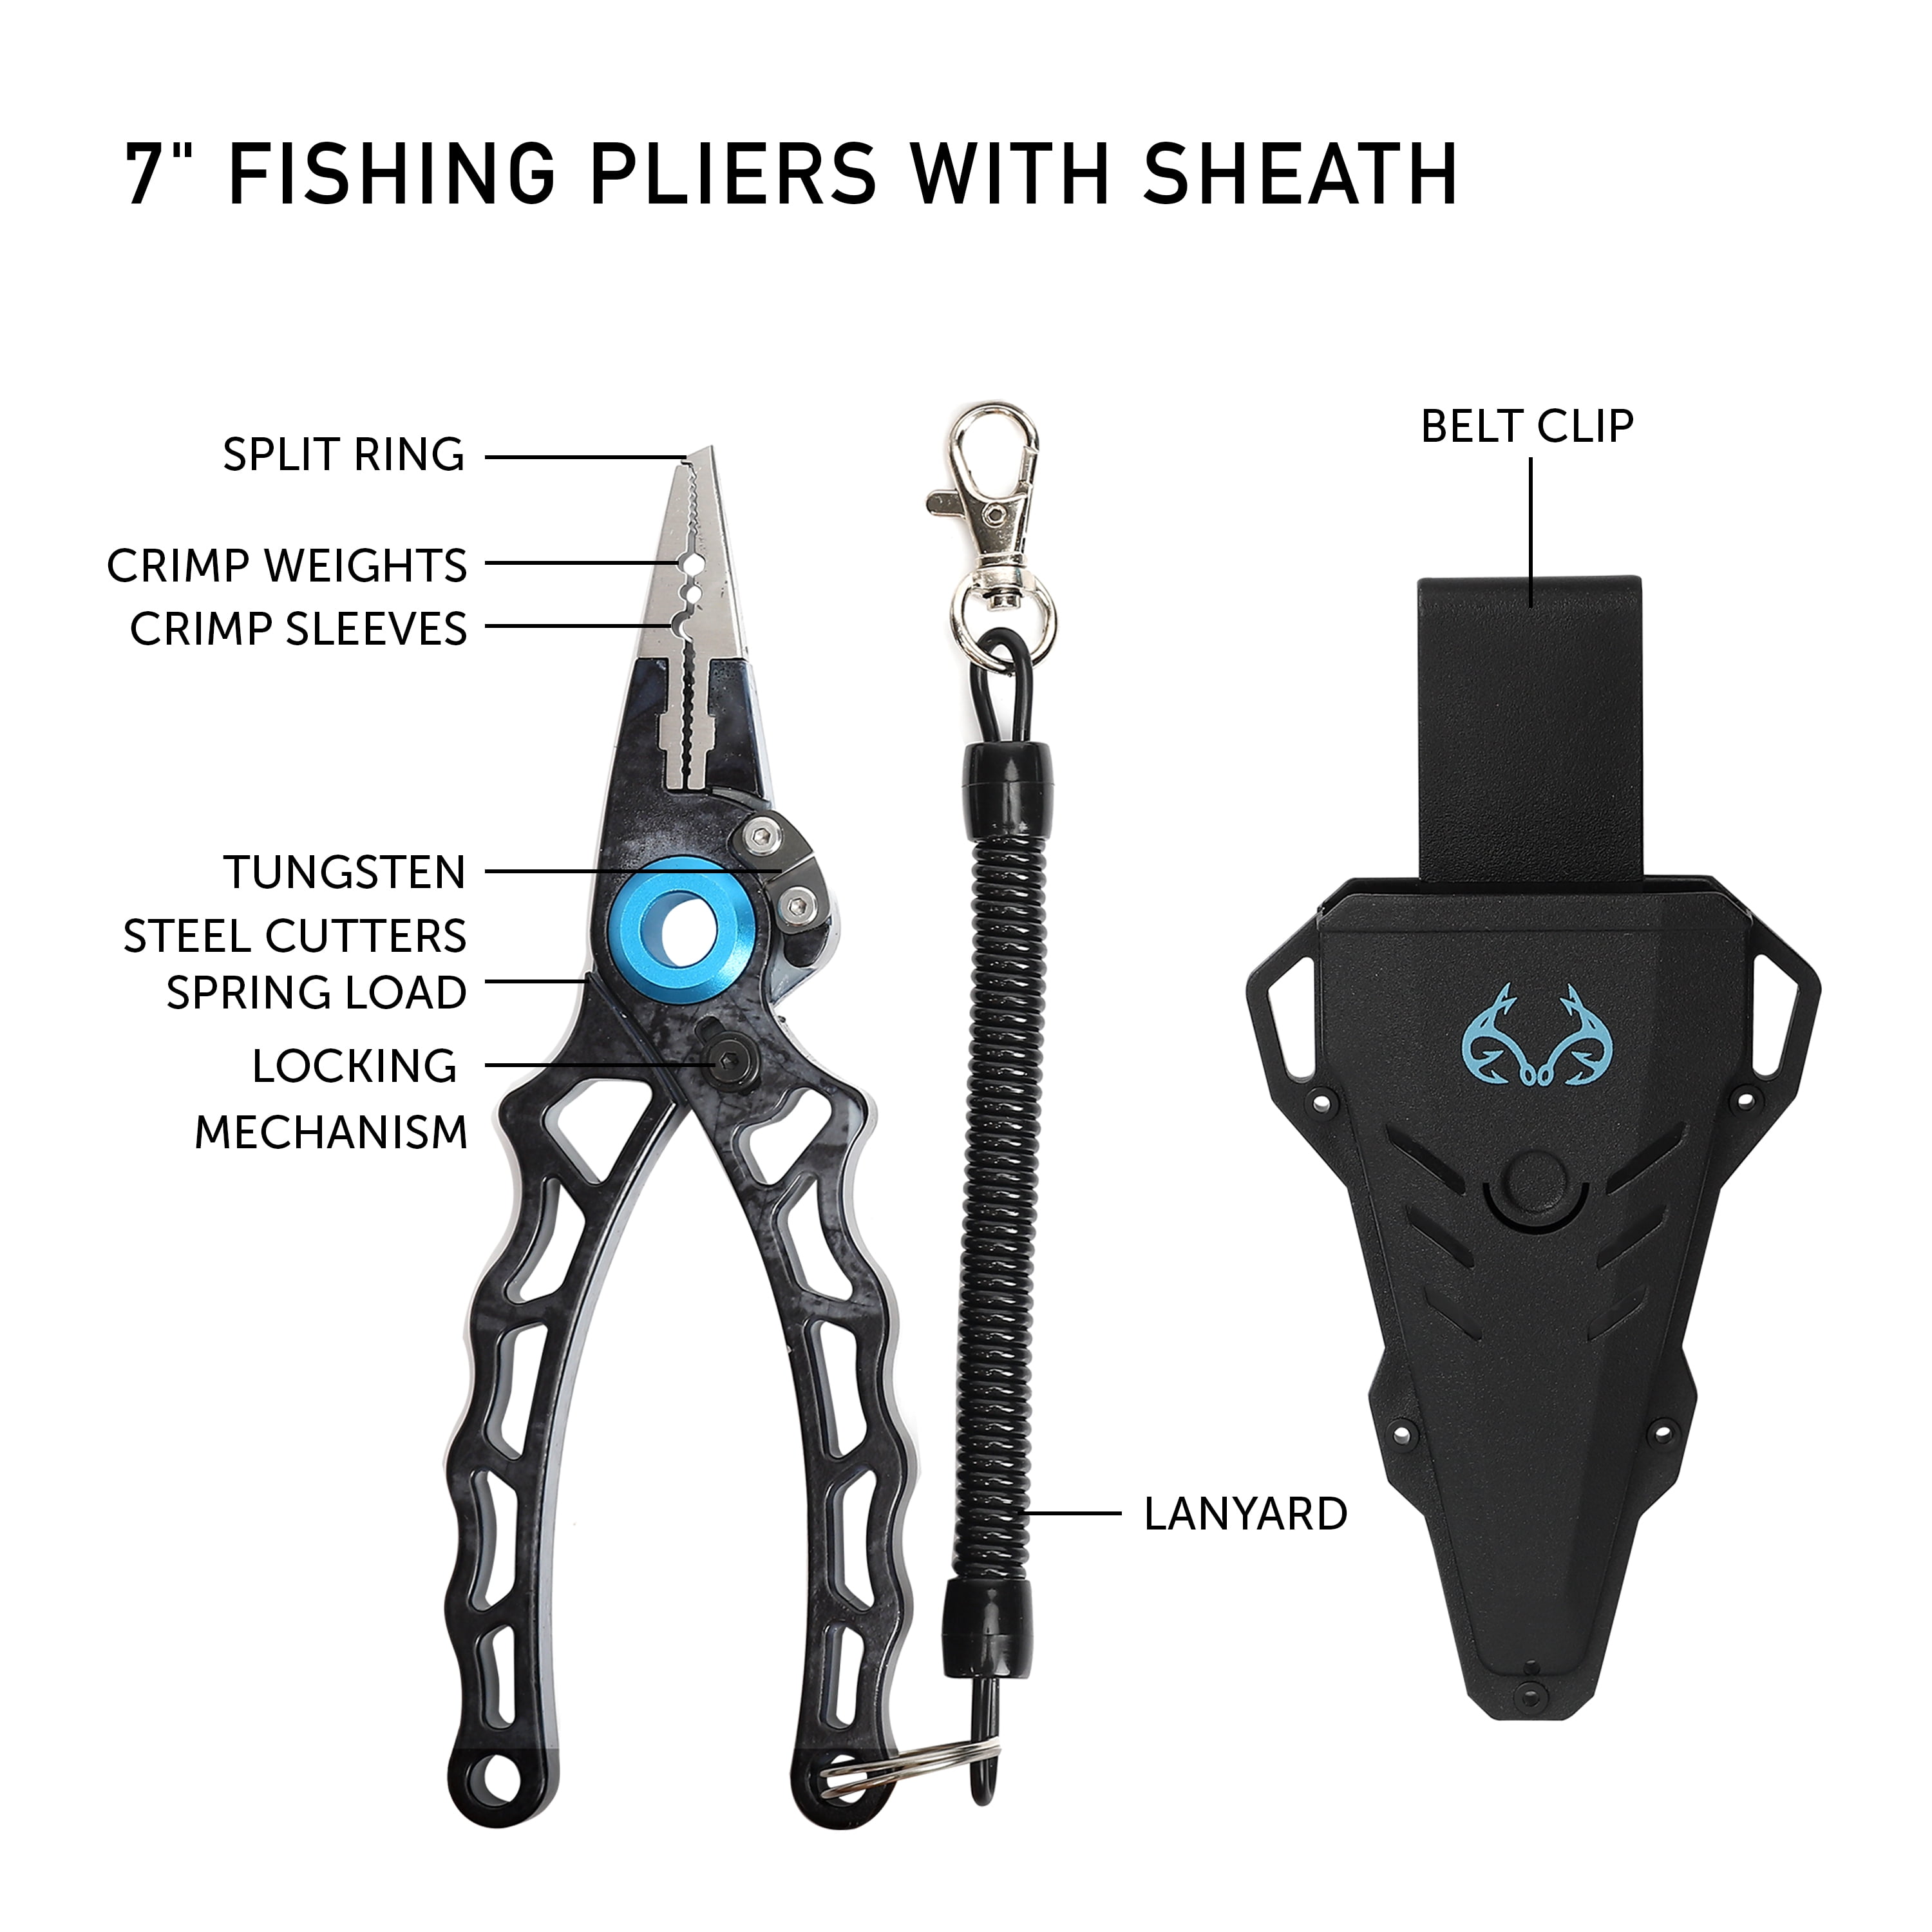 Realtree 5 Piece Angler Tool Kit Combo with Fishing Multi-Tool, Line Cutters,  Fishing Pliers, Bait Knife, Fishing Gripper 